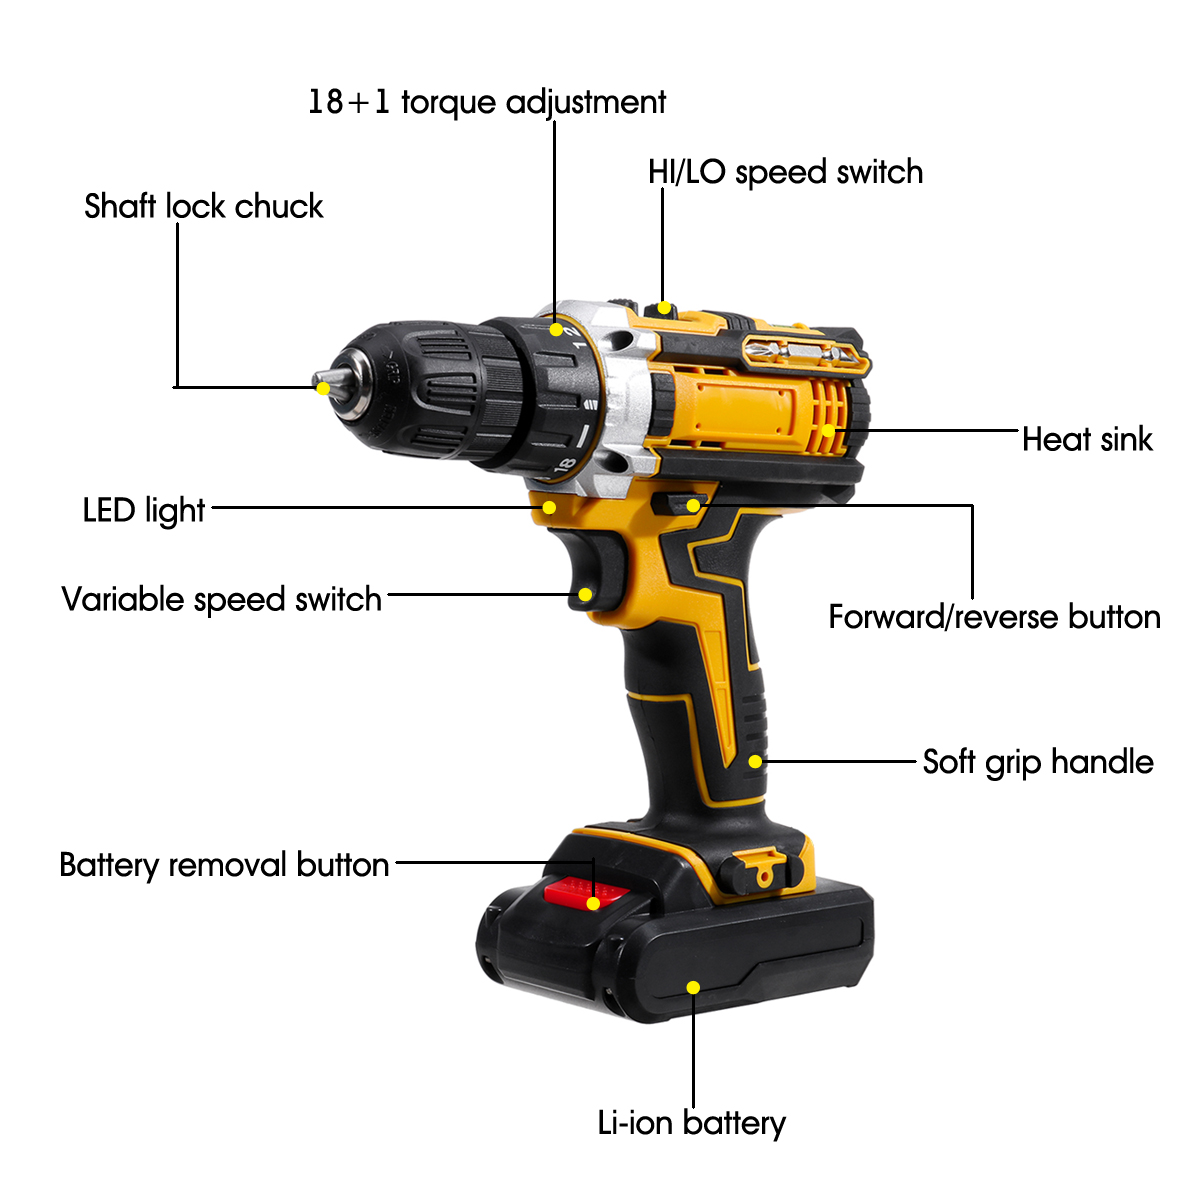 2000rpm-38Nm-21V-Lithium-Electric-Impact-Hammer-Drill-Wood-Drilling-Screwdrivers-with-Battery-1943471-6